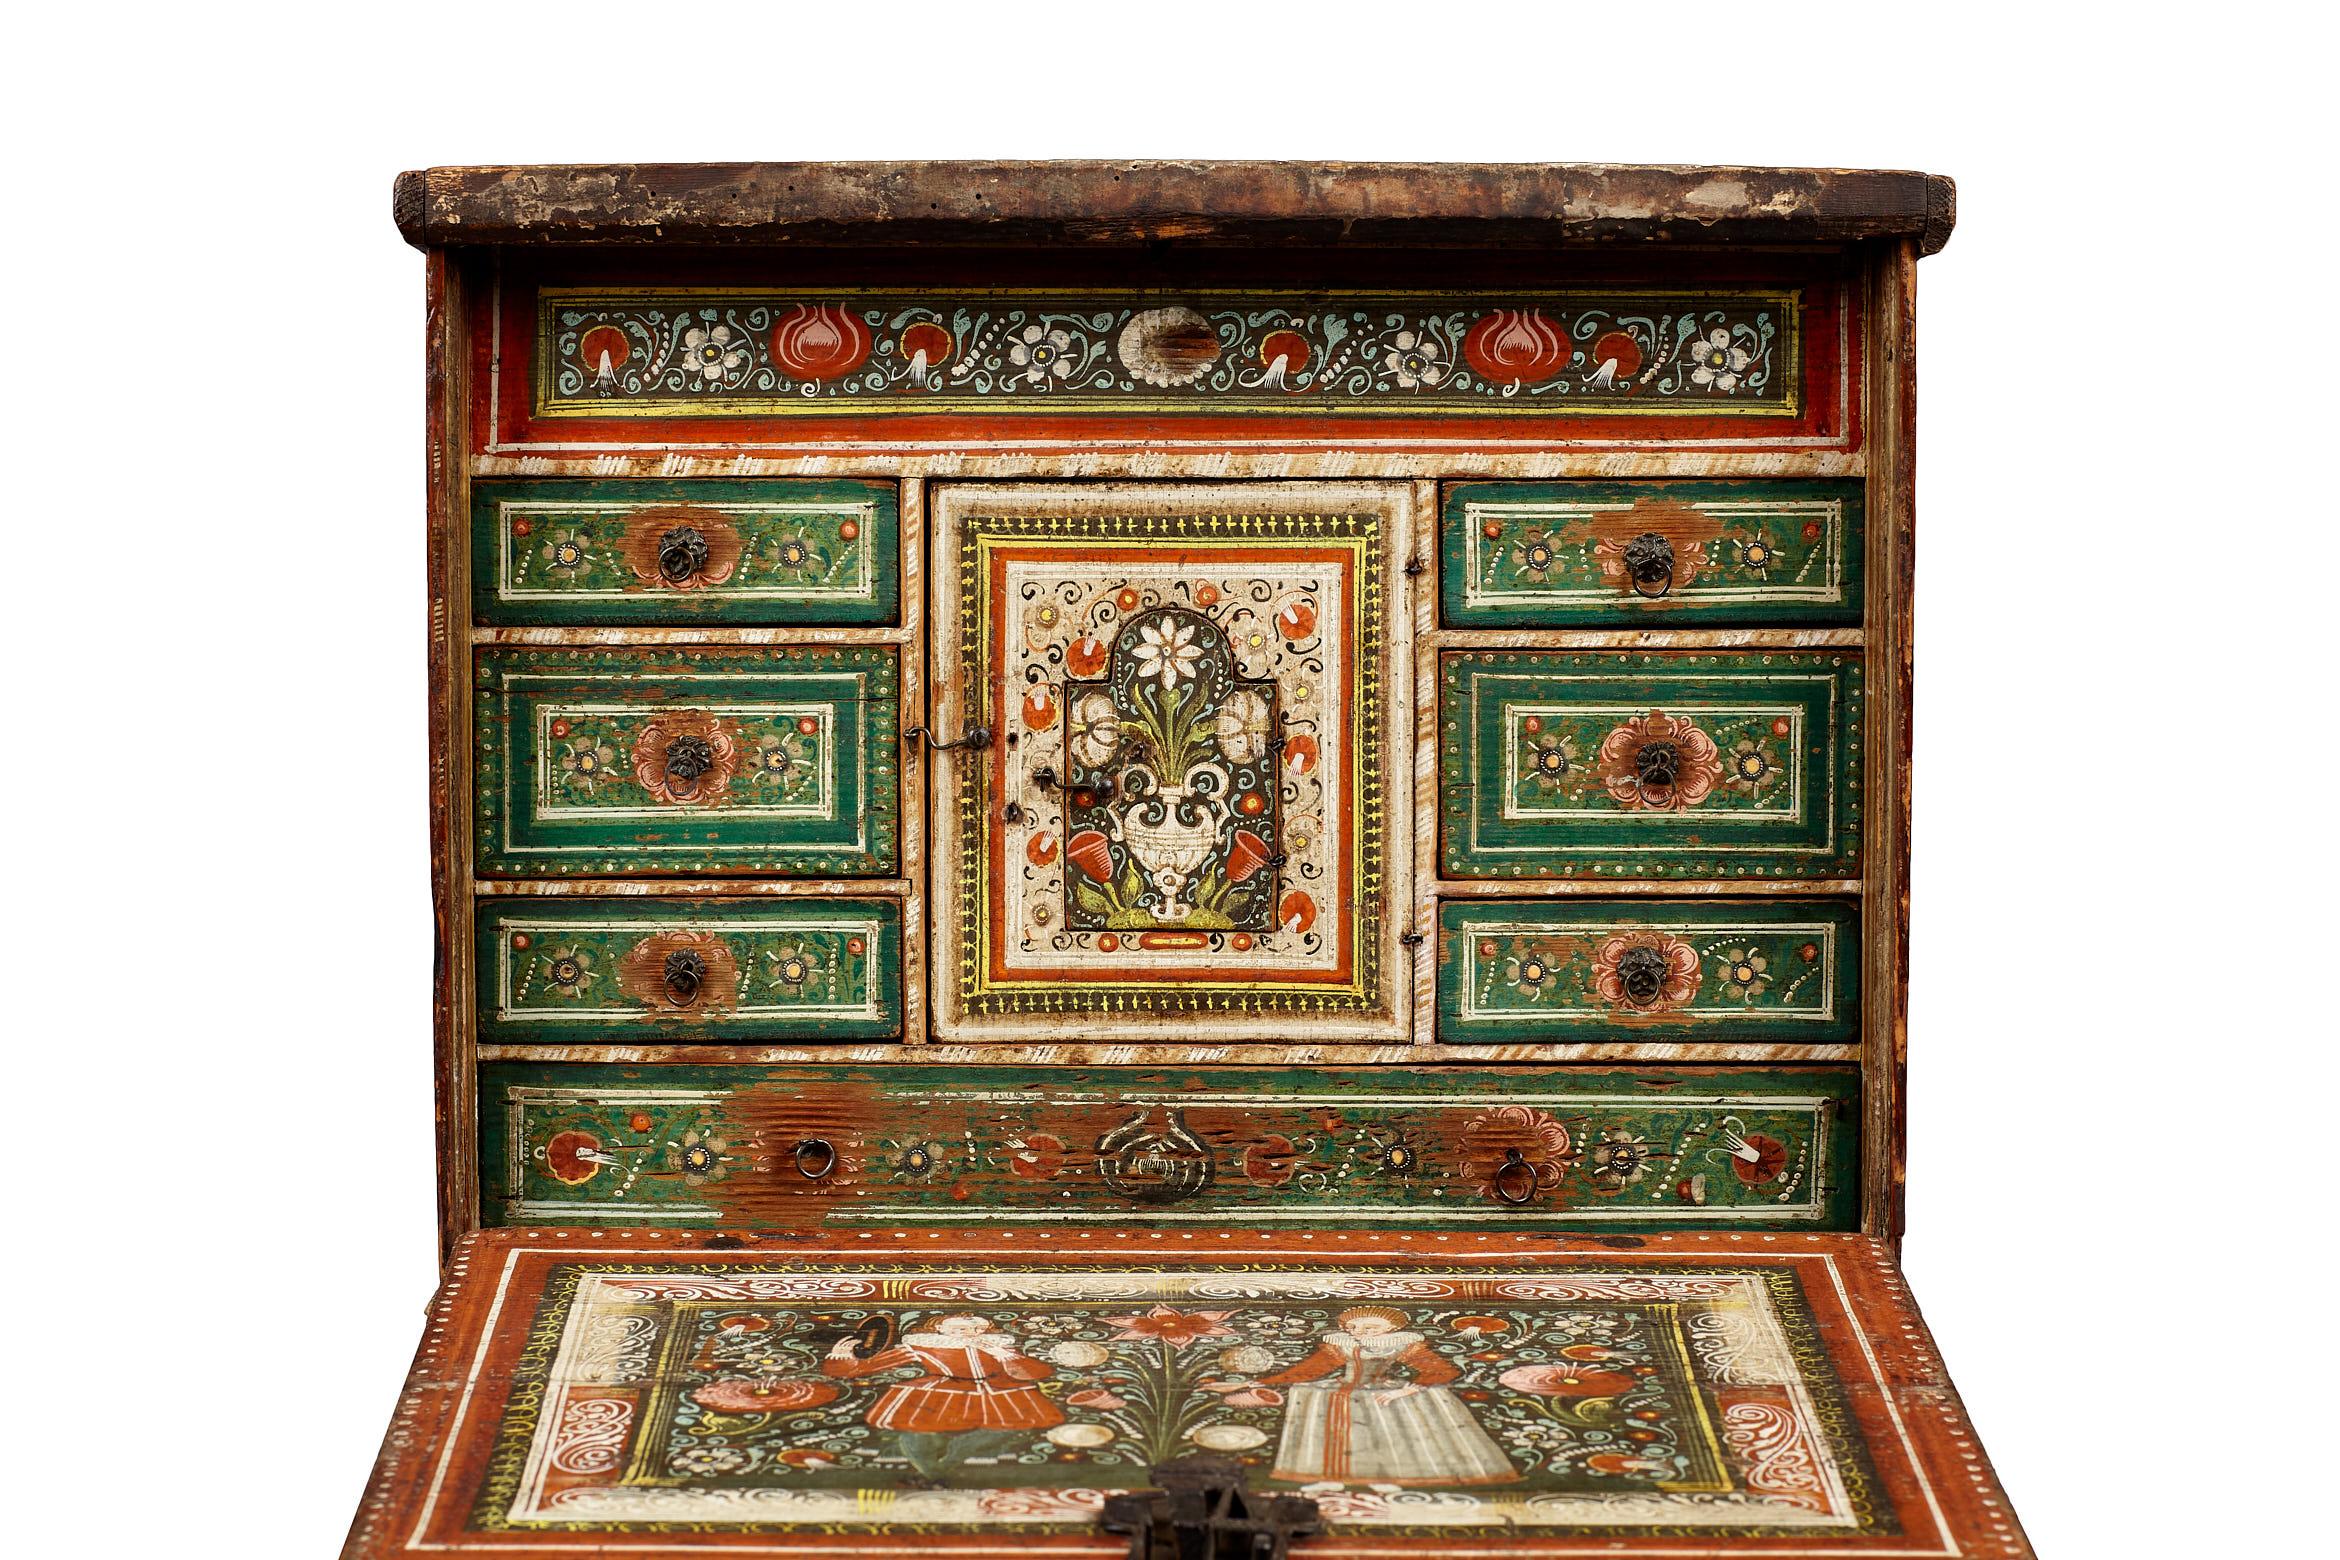 18th Century and Earlier Elizabethan Polychrome Painted Marriage Cabinet, German, circa 1580-1600